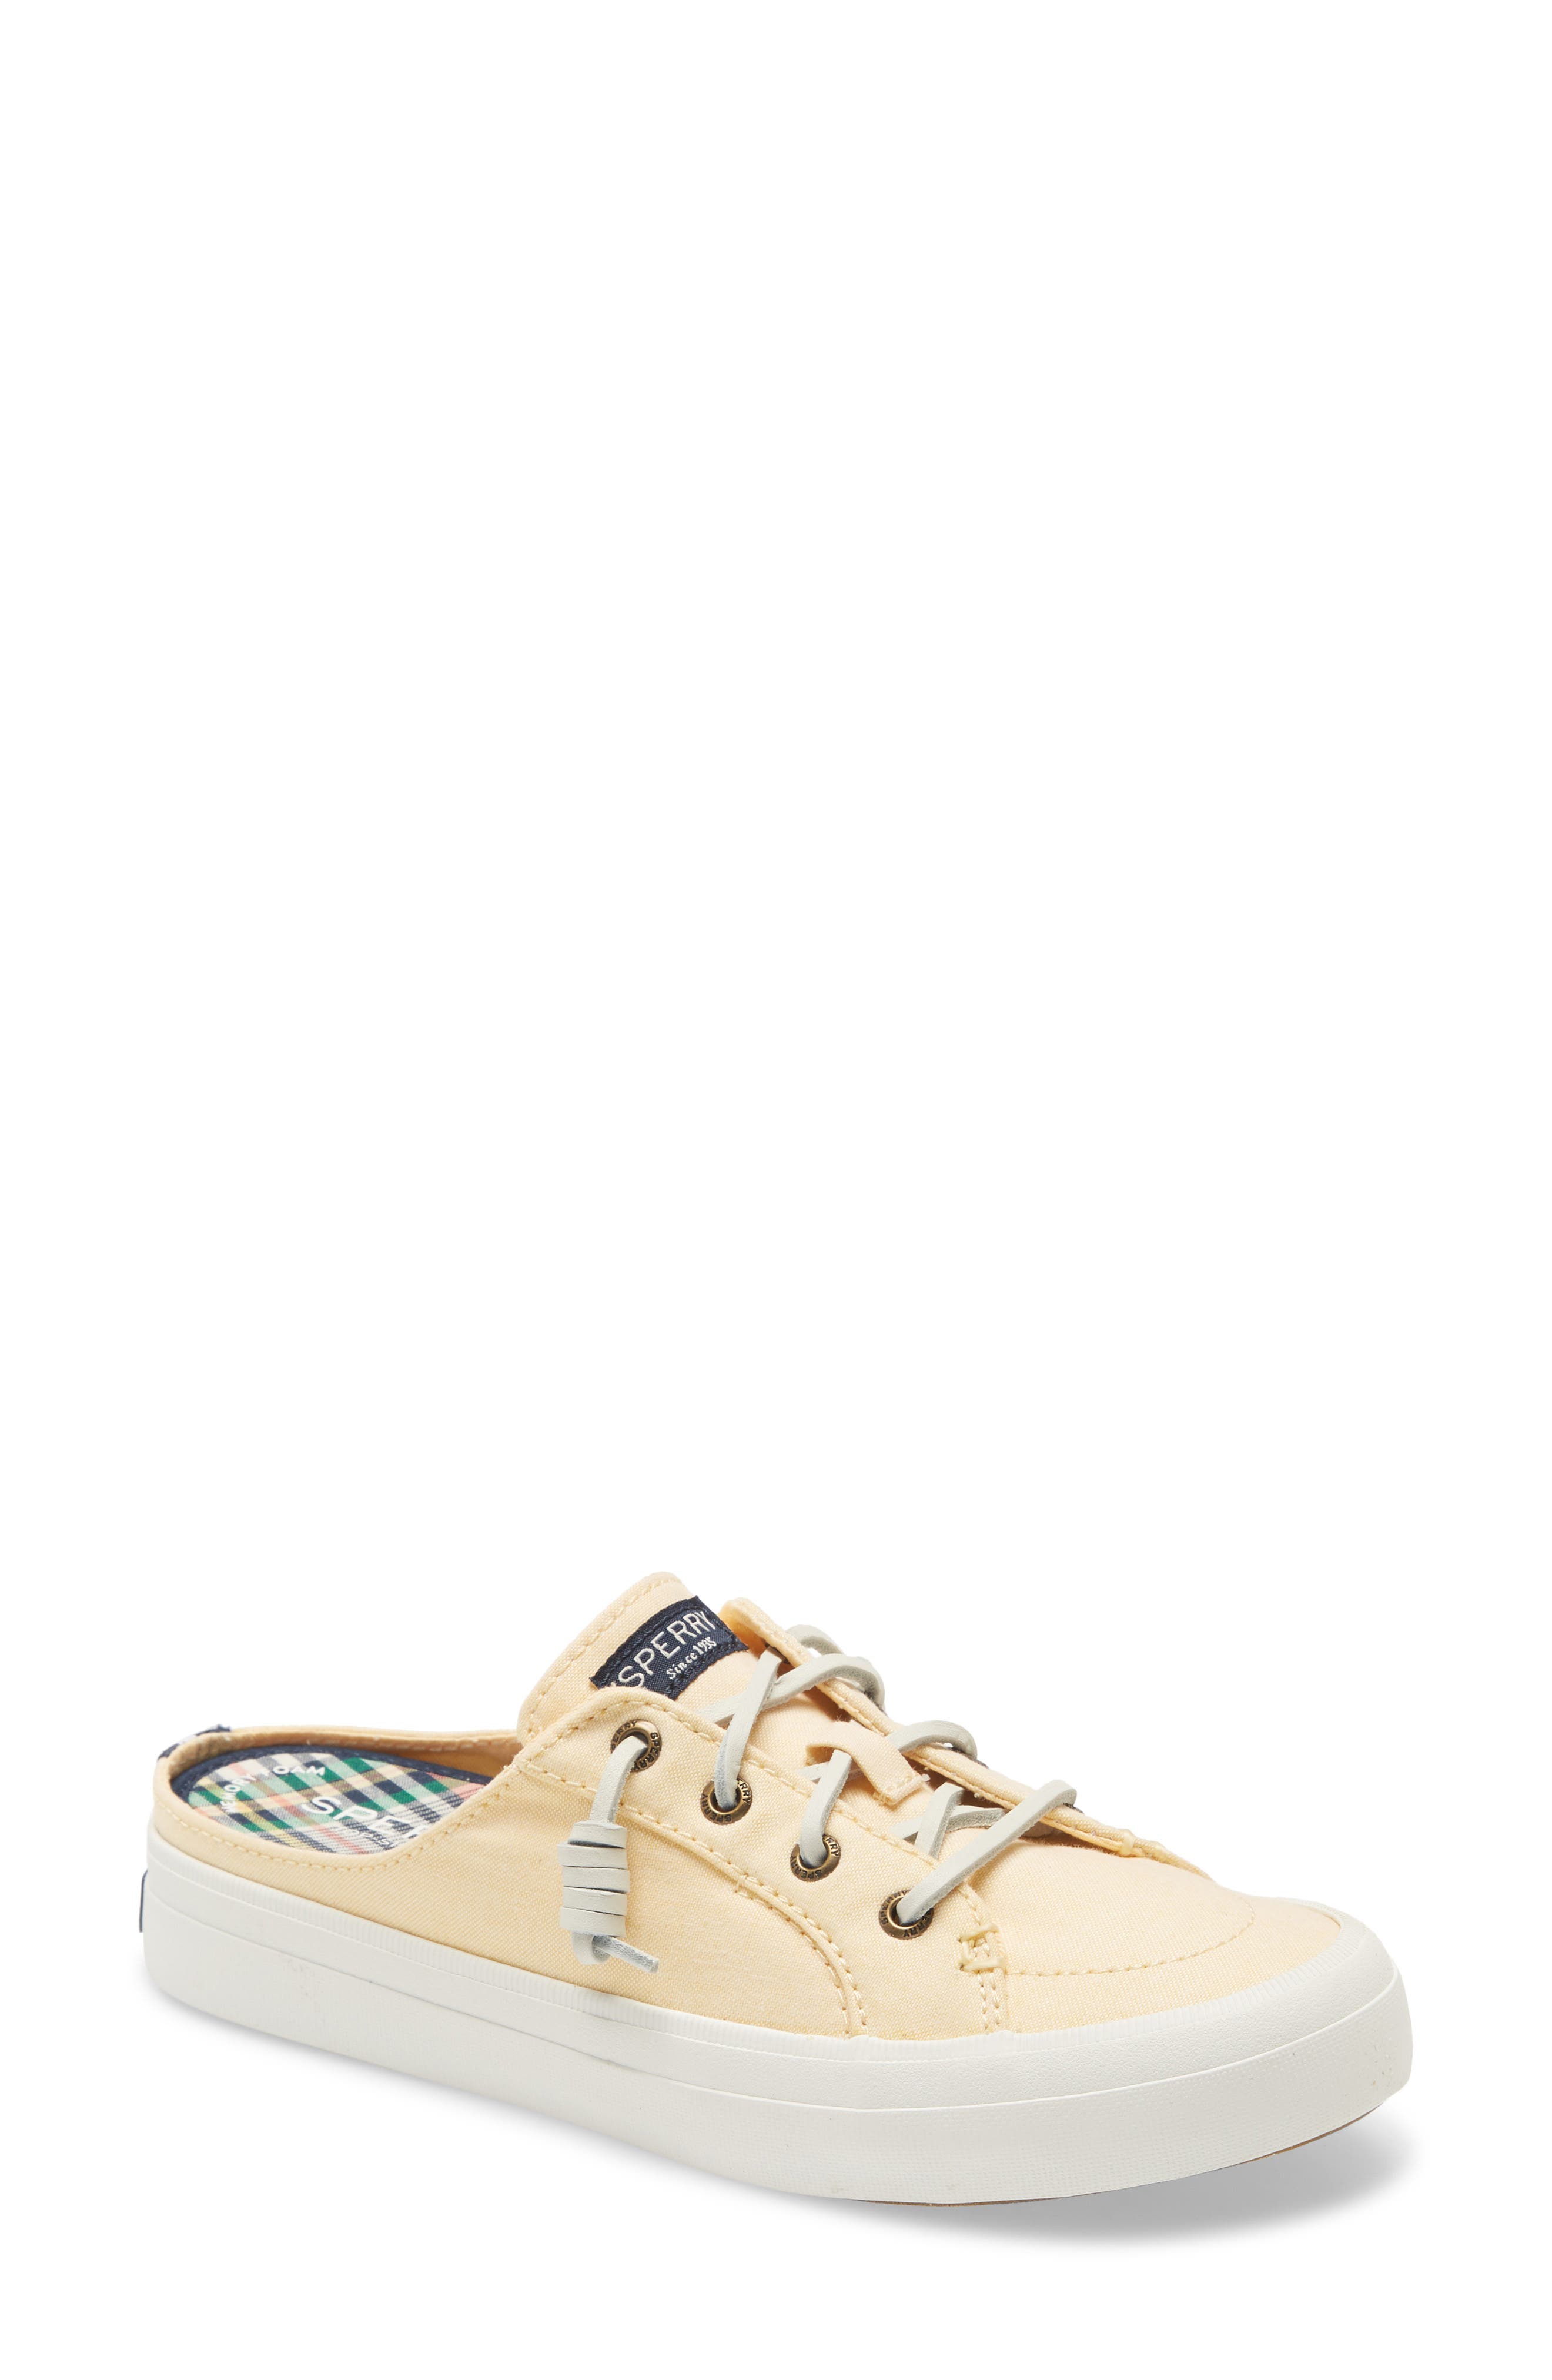 nordstrom sperry womens